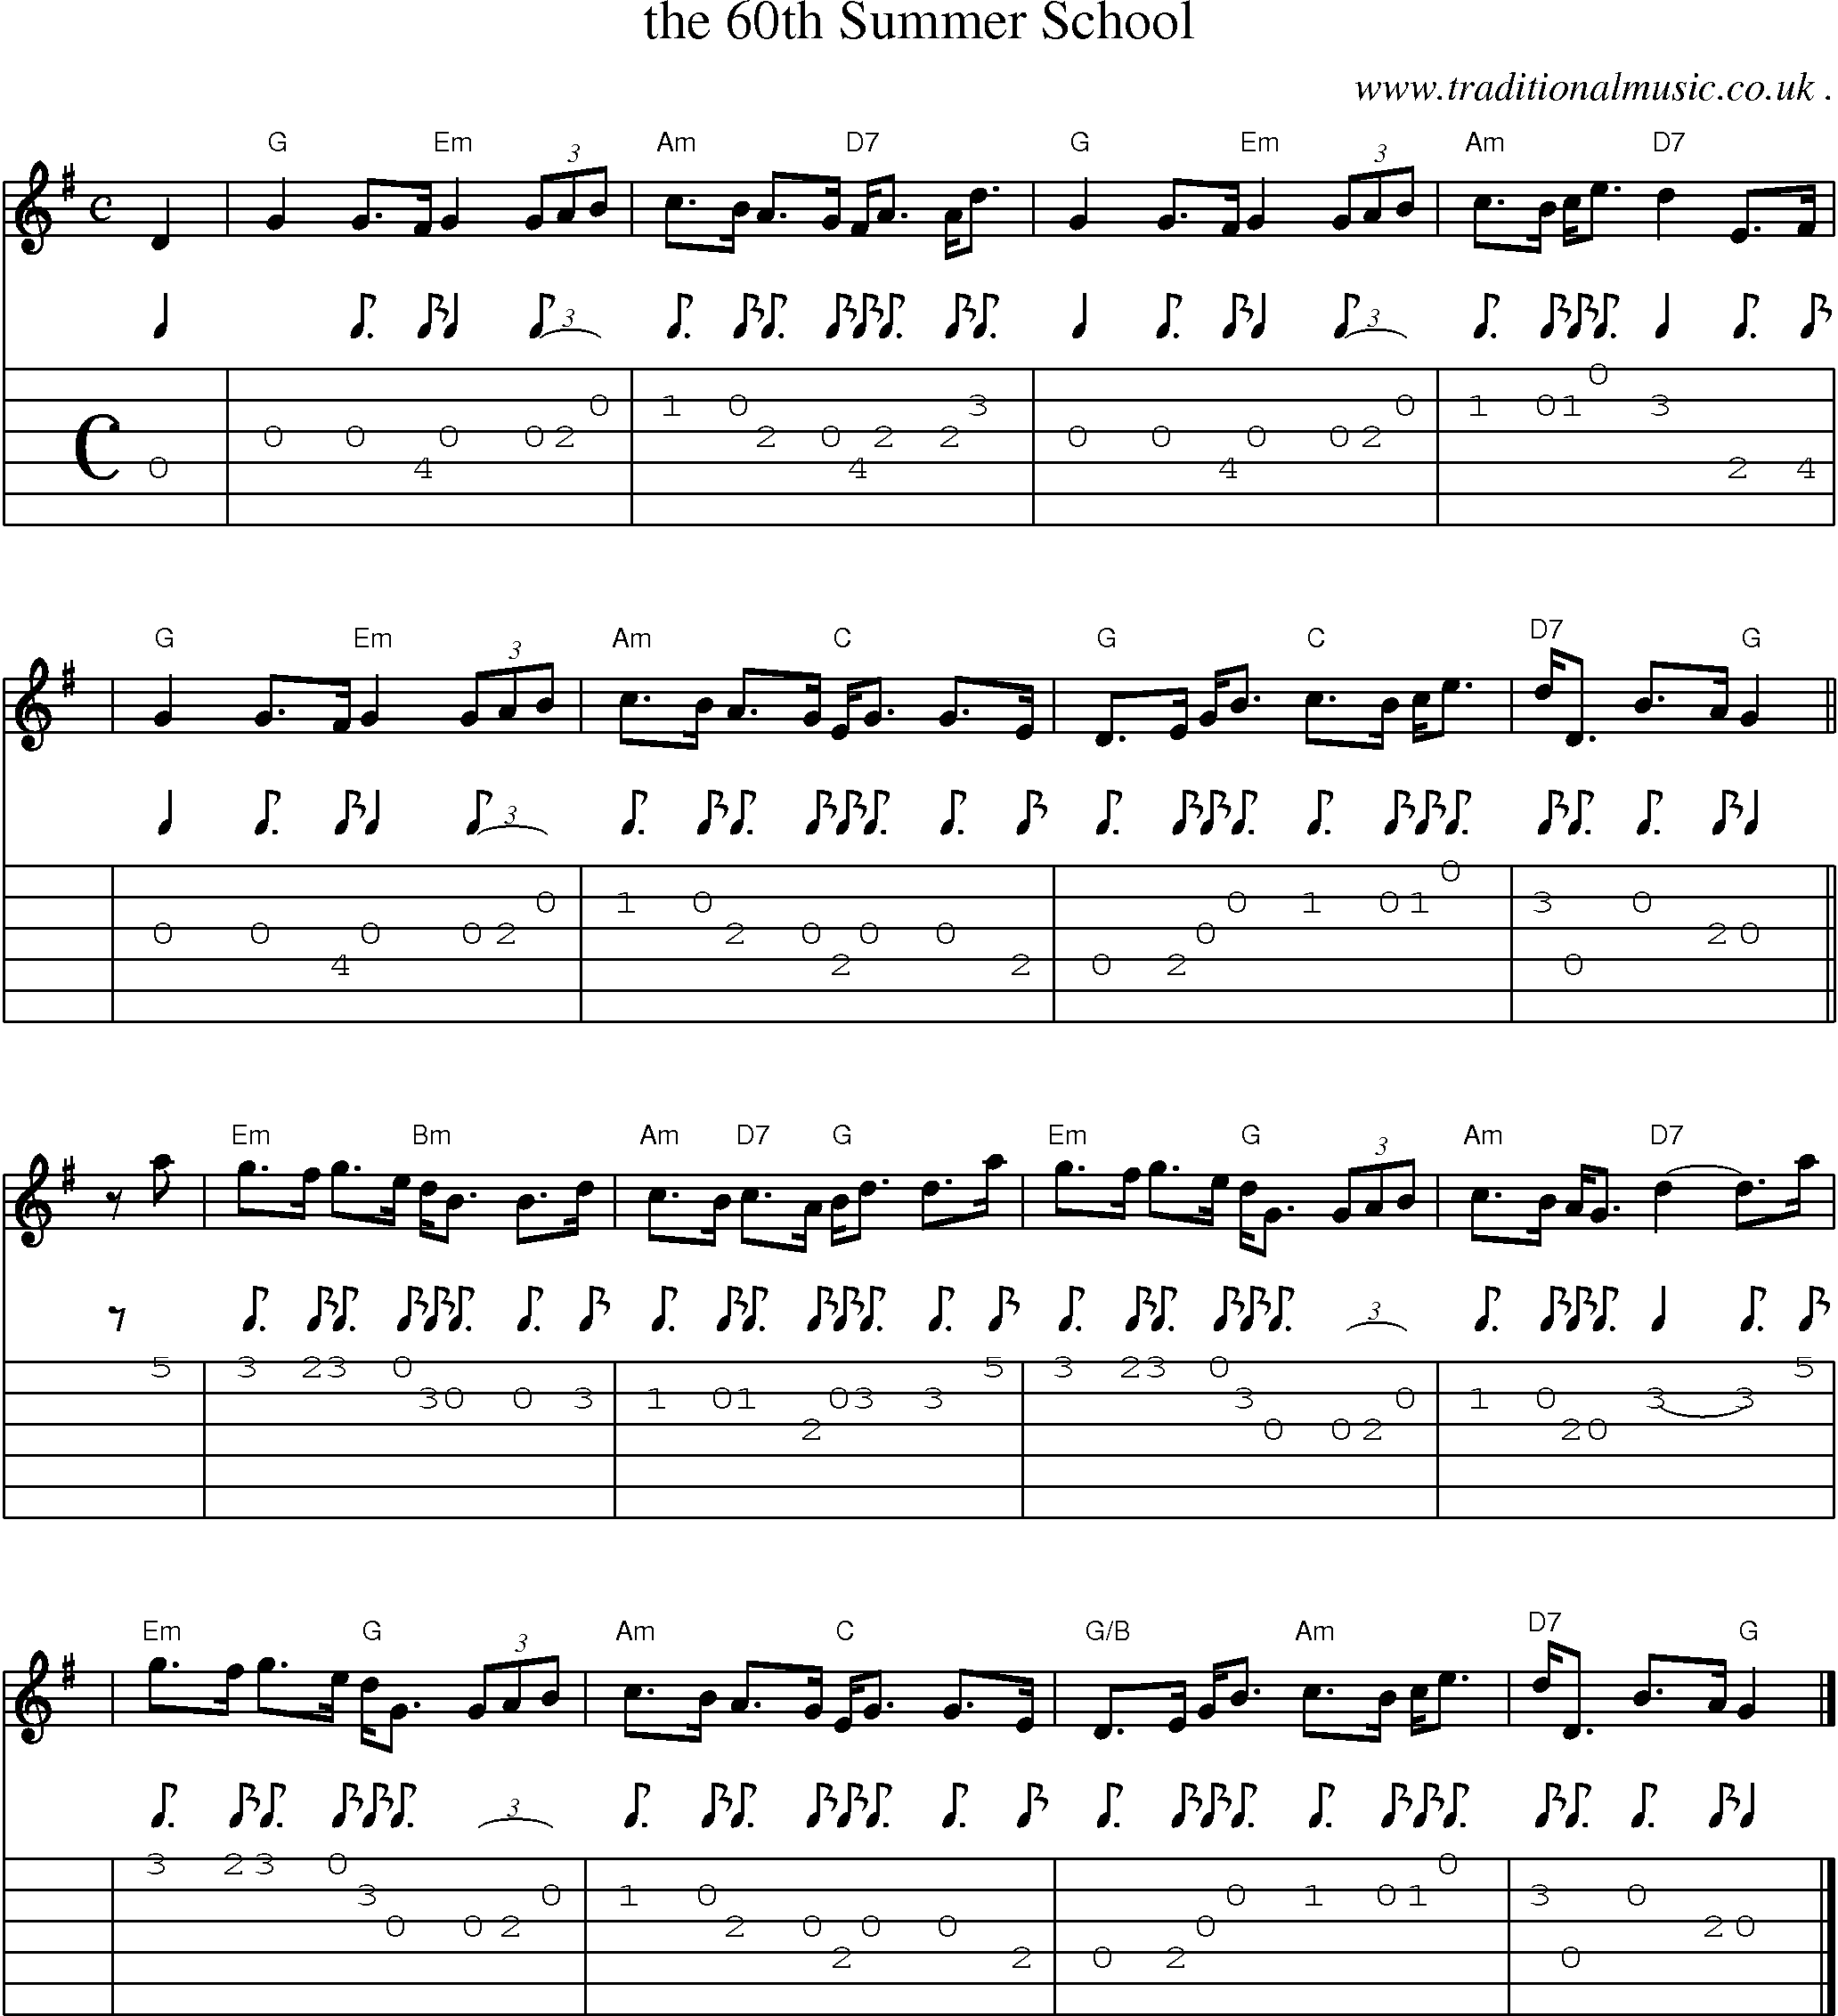 Sheet-music  score, Chords and Guitar Tabs for The 60th Summer School